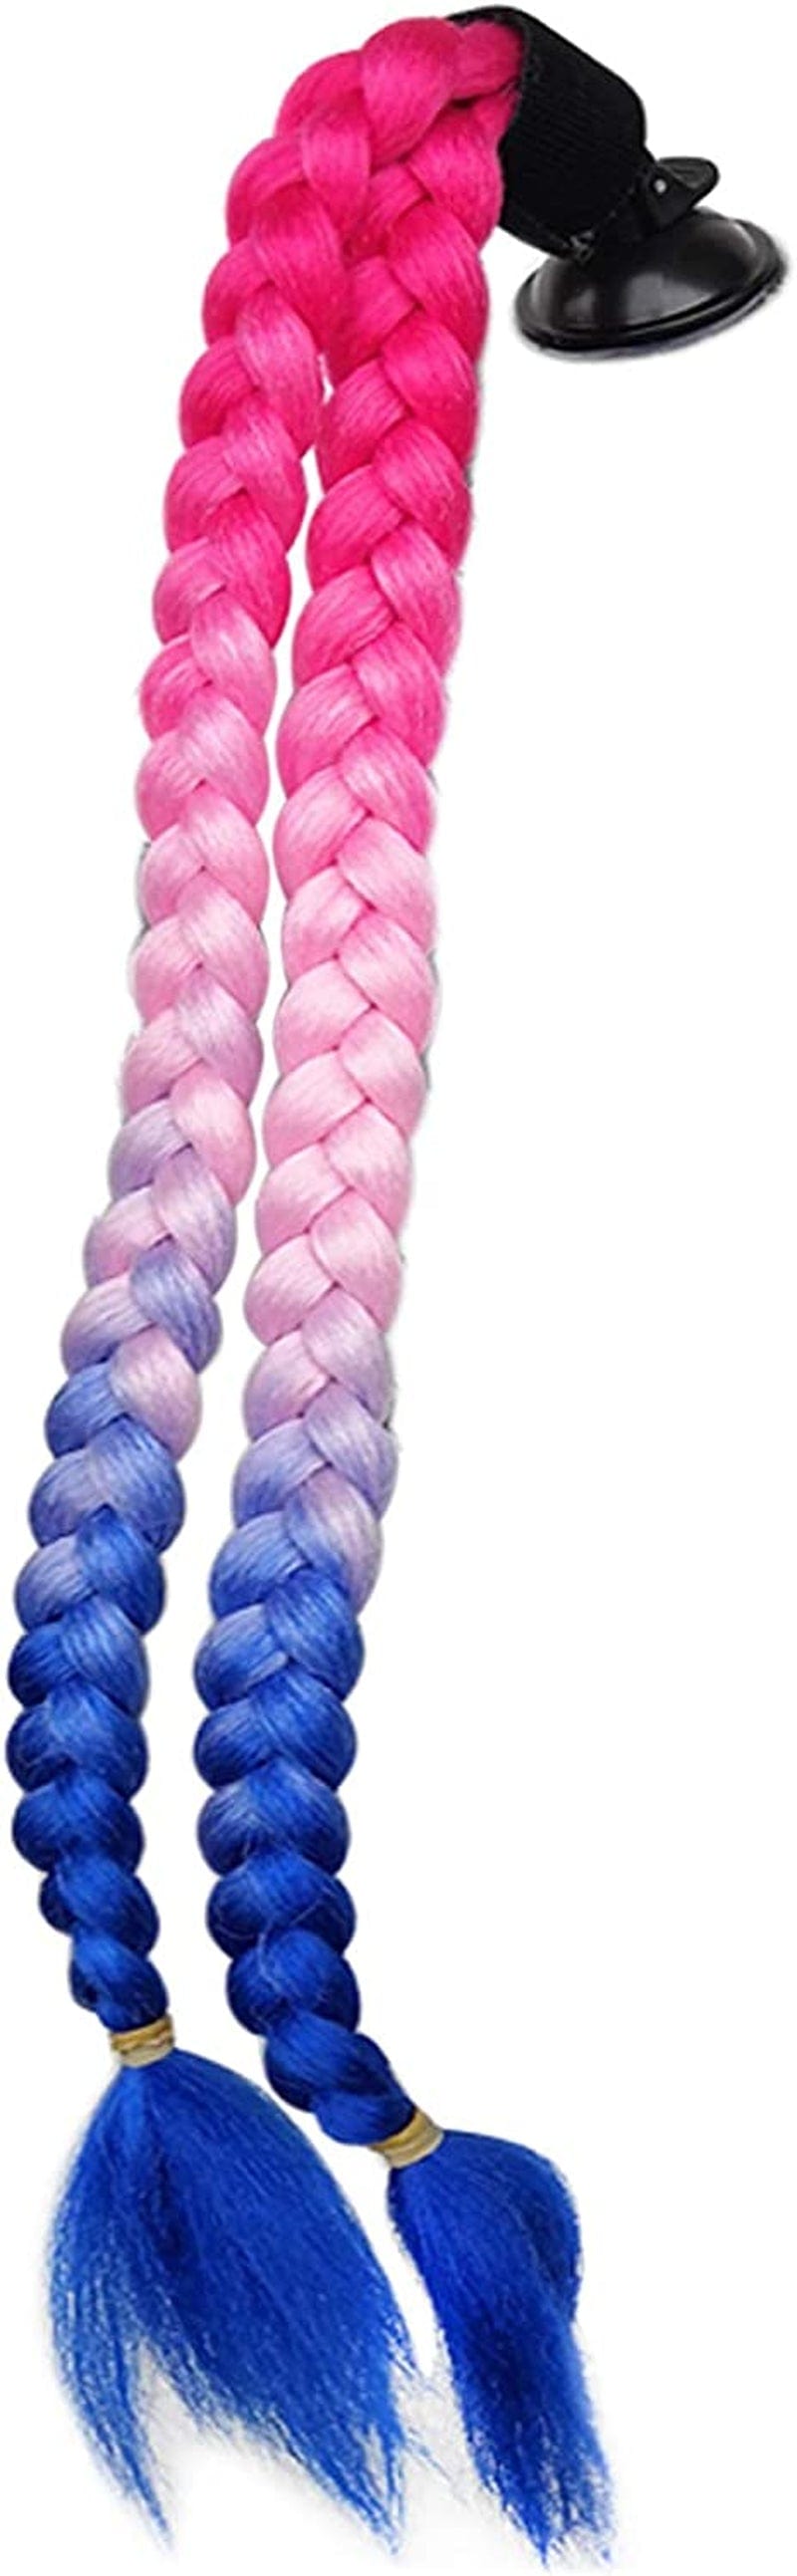 3T-SISTER Pigtails Accessory for Helmet Pigtails Ponytail Braids Hair for Motorcycle Bicycle Batting Skate Helmet or Other Helmets 2 Braids Together 24Inch /Many Colors (Helmet Not Included)